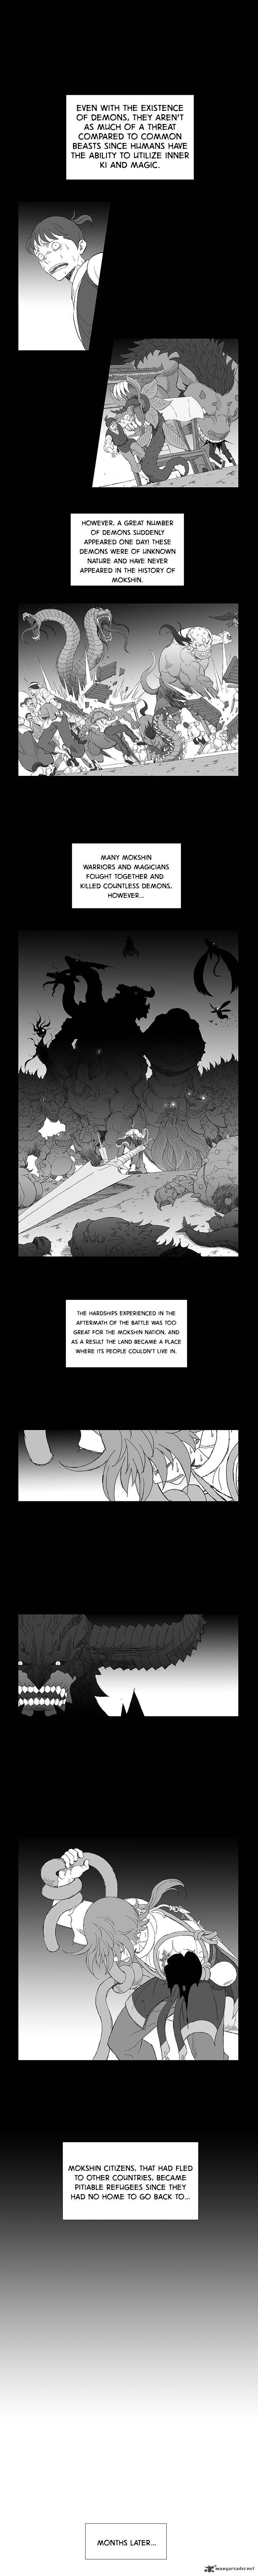 Wind Sword Chapter 1 Page 2